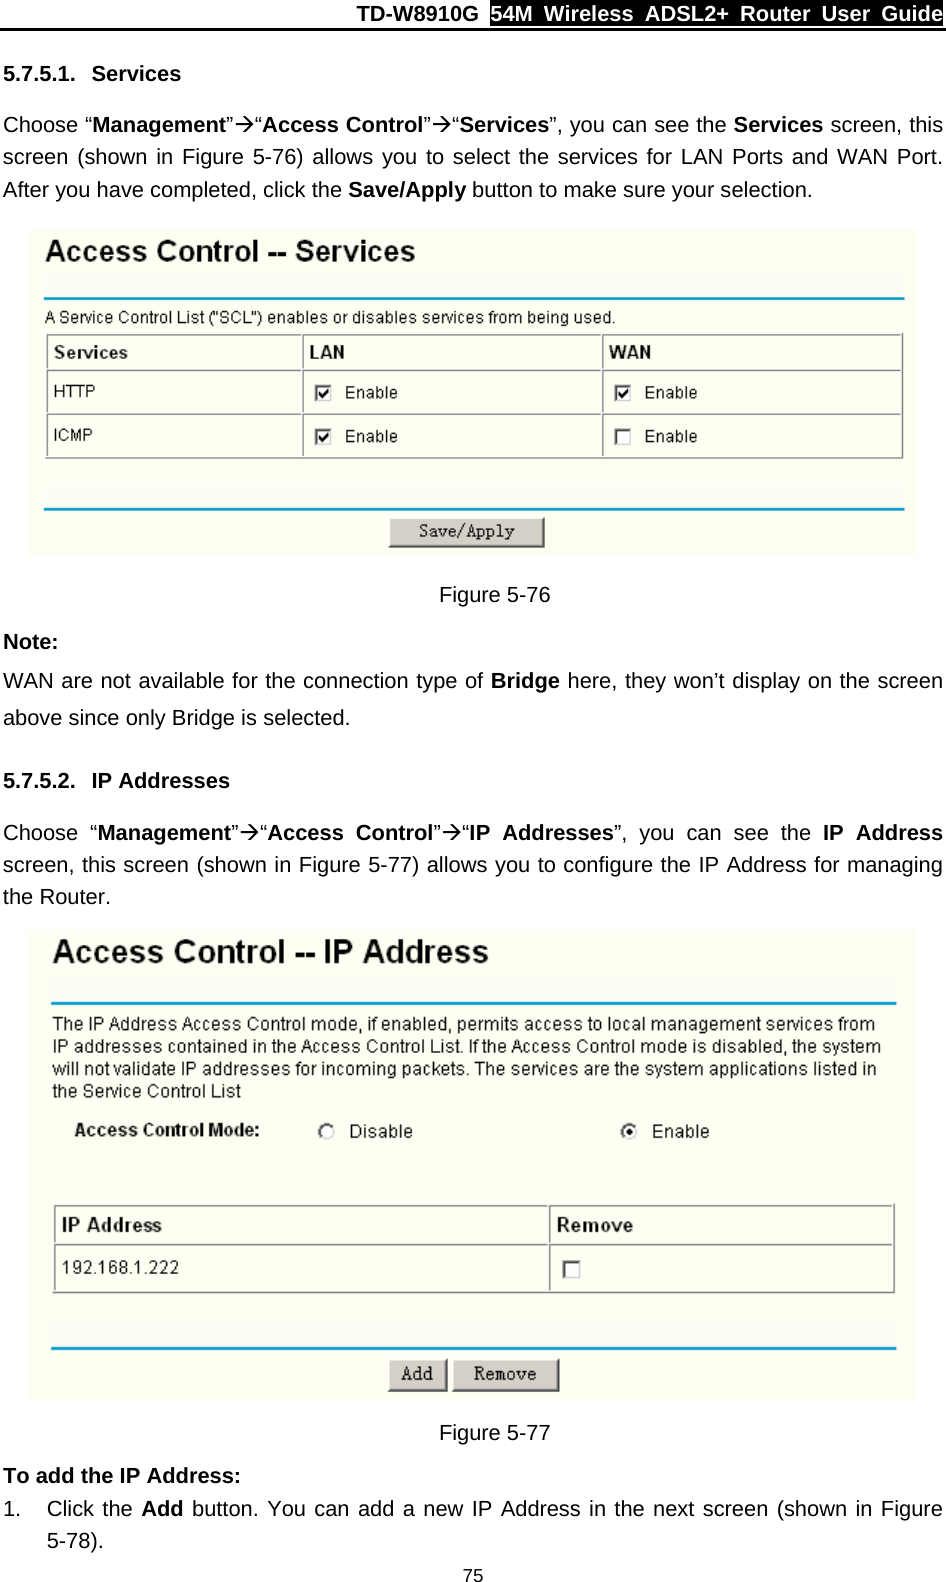 TD-W8910G  54M Wireless ADSL2+ Router User Guide  755.7.5.1. Services Choose “Management”Æ“Access Control”Æ“Services”, you can see the Services screen, this screen (shown in Figure 5-76) allows you to select the services for LAN Ports and WAN Port. After you have completed, click the Save/Apply button to make sure your selection.  Figure 5-76 Note: WAN are not available for the connection type of Bridge here, they won’t display on the screen above since only Bridge is selected. 5.7.5.2. IP Addresses Choose “Management”Æ“Access Control”Æ“IP Addresses”, you can see the IP Address screen, this screen (shown in Figure 5-77) allows you to configure the IP Address for managing the Router.  Figure 5-77 To add the IP Address: 1. Click the Add button. You can add a new IP Address in the next screen (shown in Figure 5-78). 